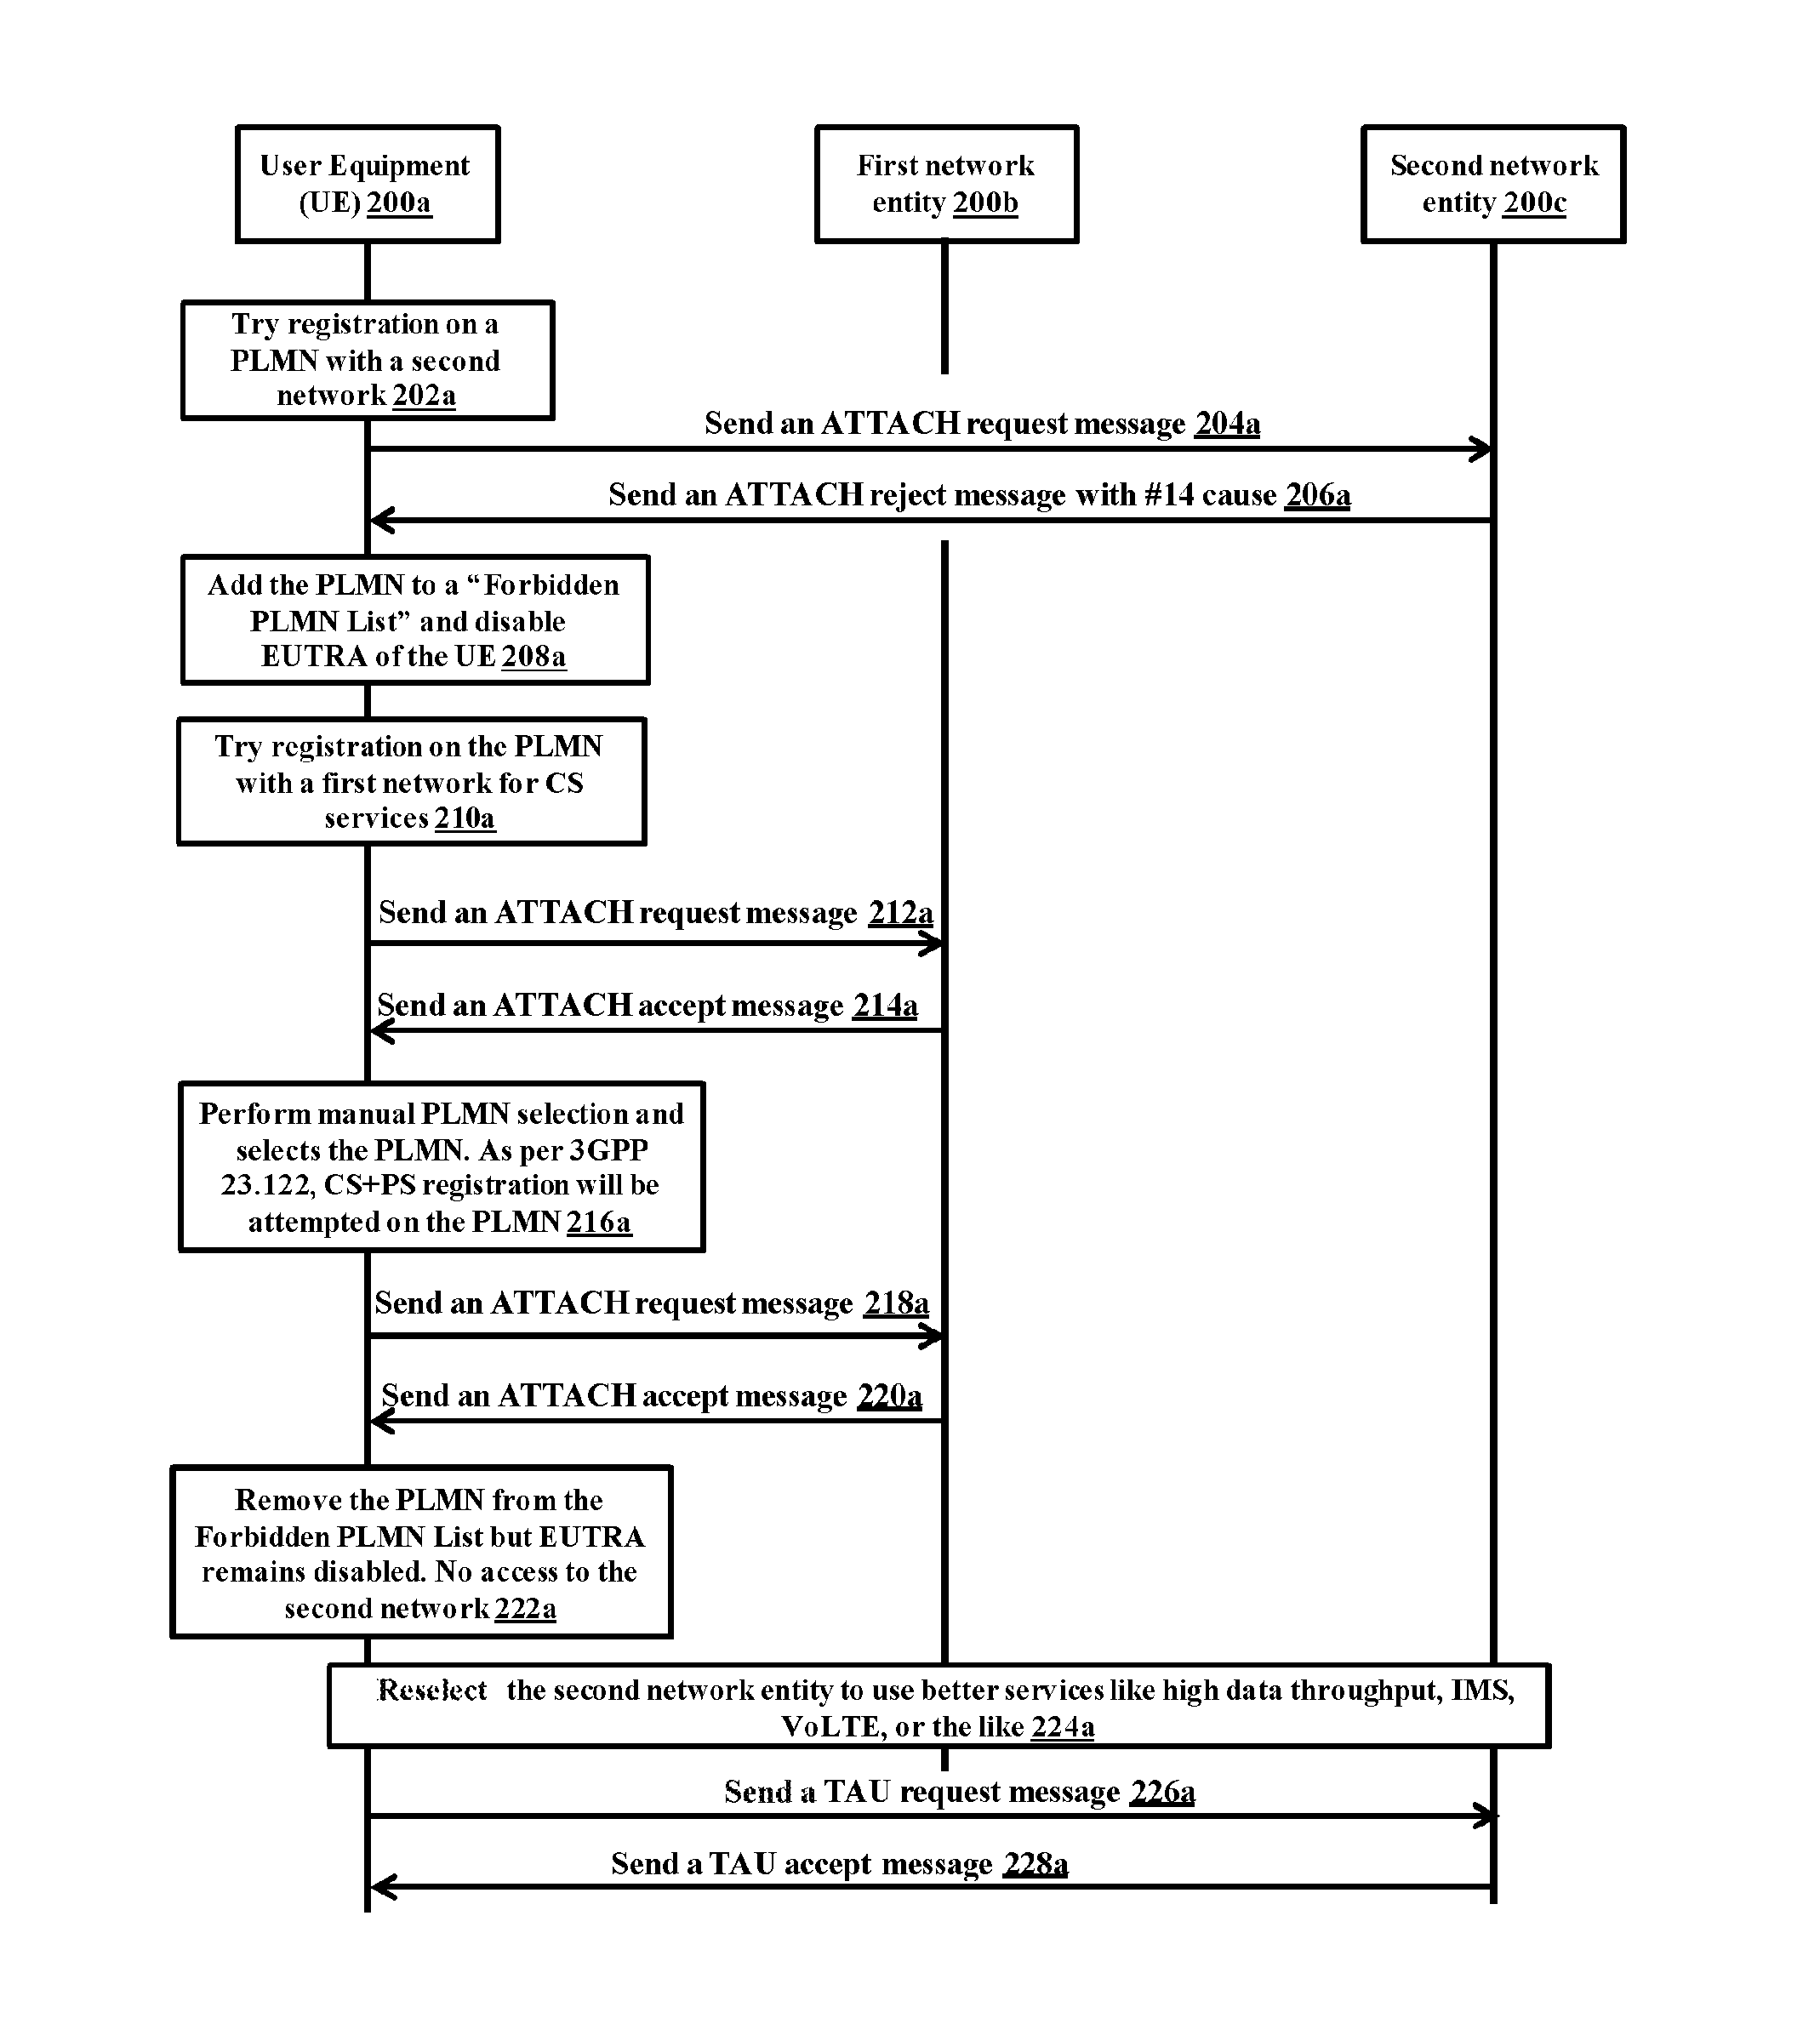 Method for handling attach reject message with #14 cause at user equipment